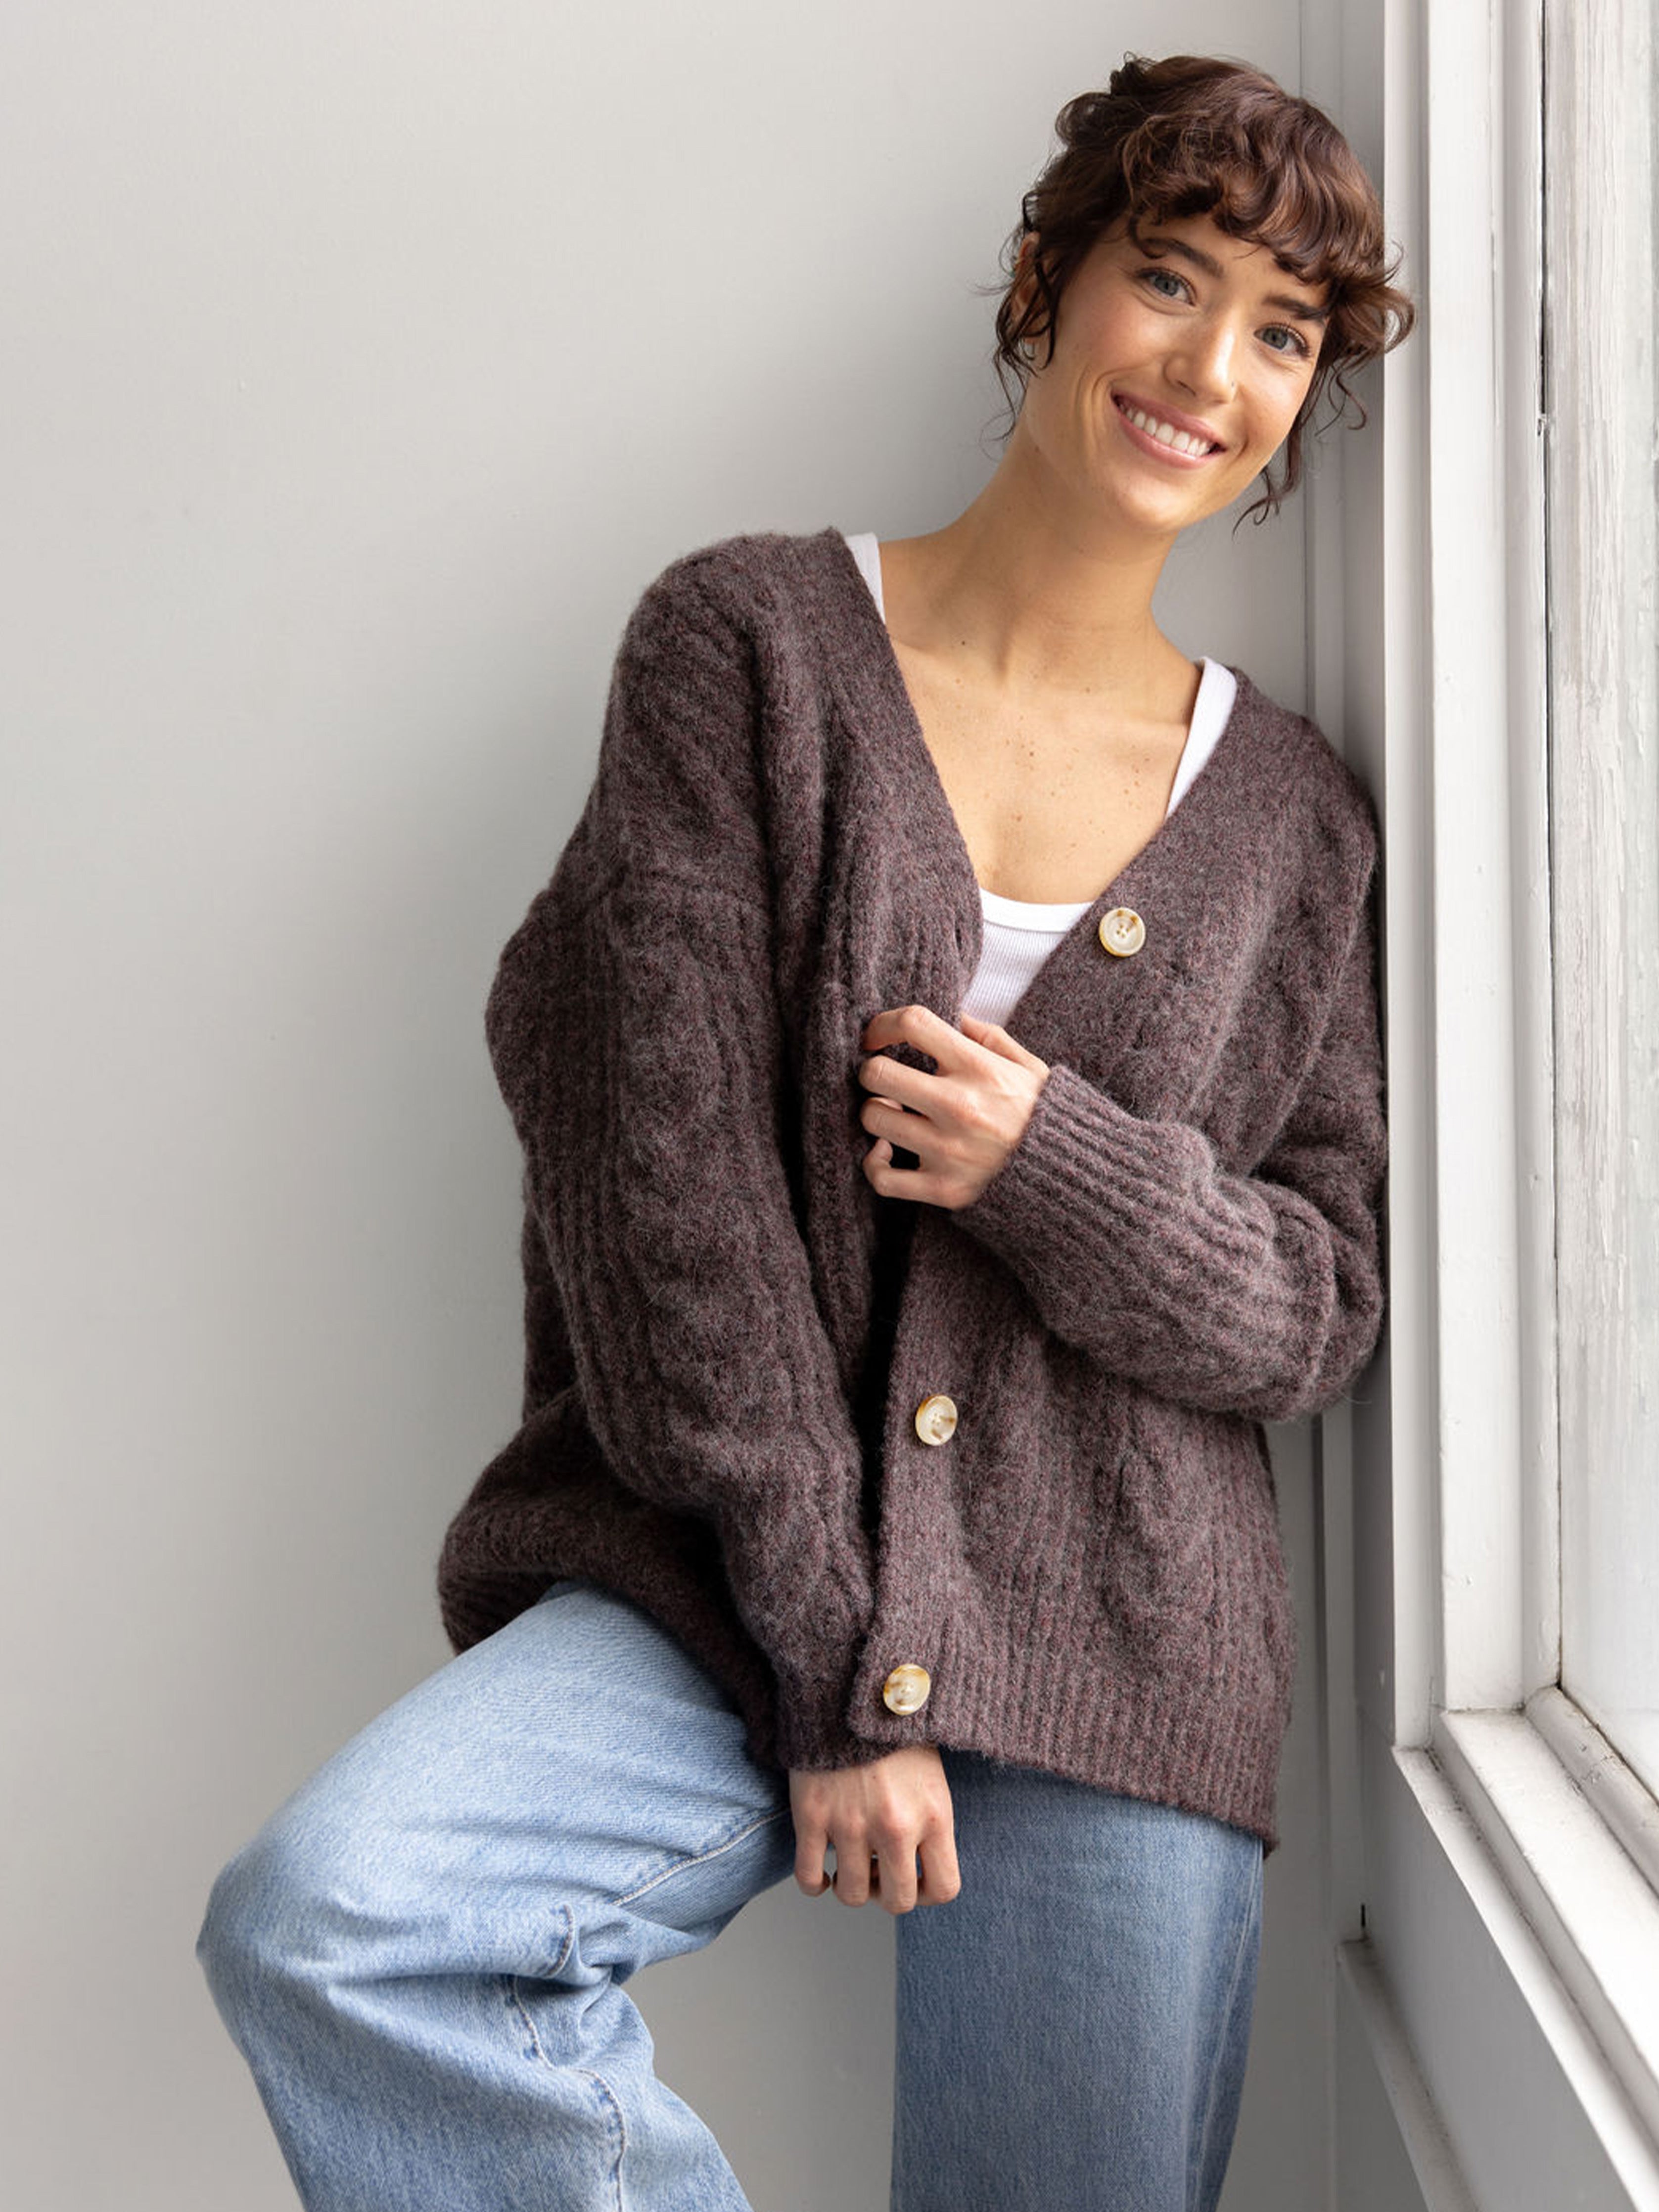 Woman wearing bordeaux cardigan and jeans in front of wall |Color:Bordeaux